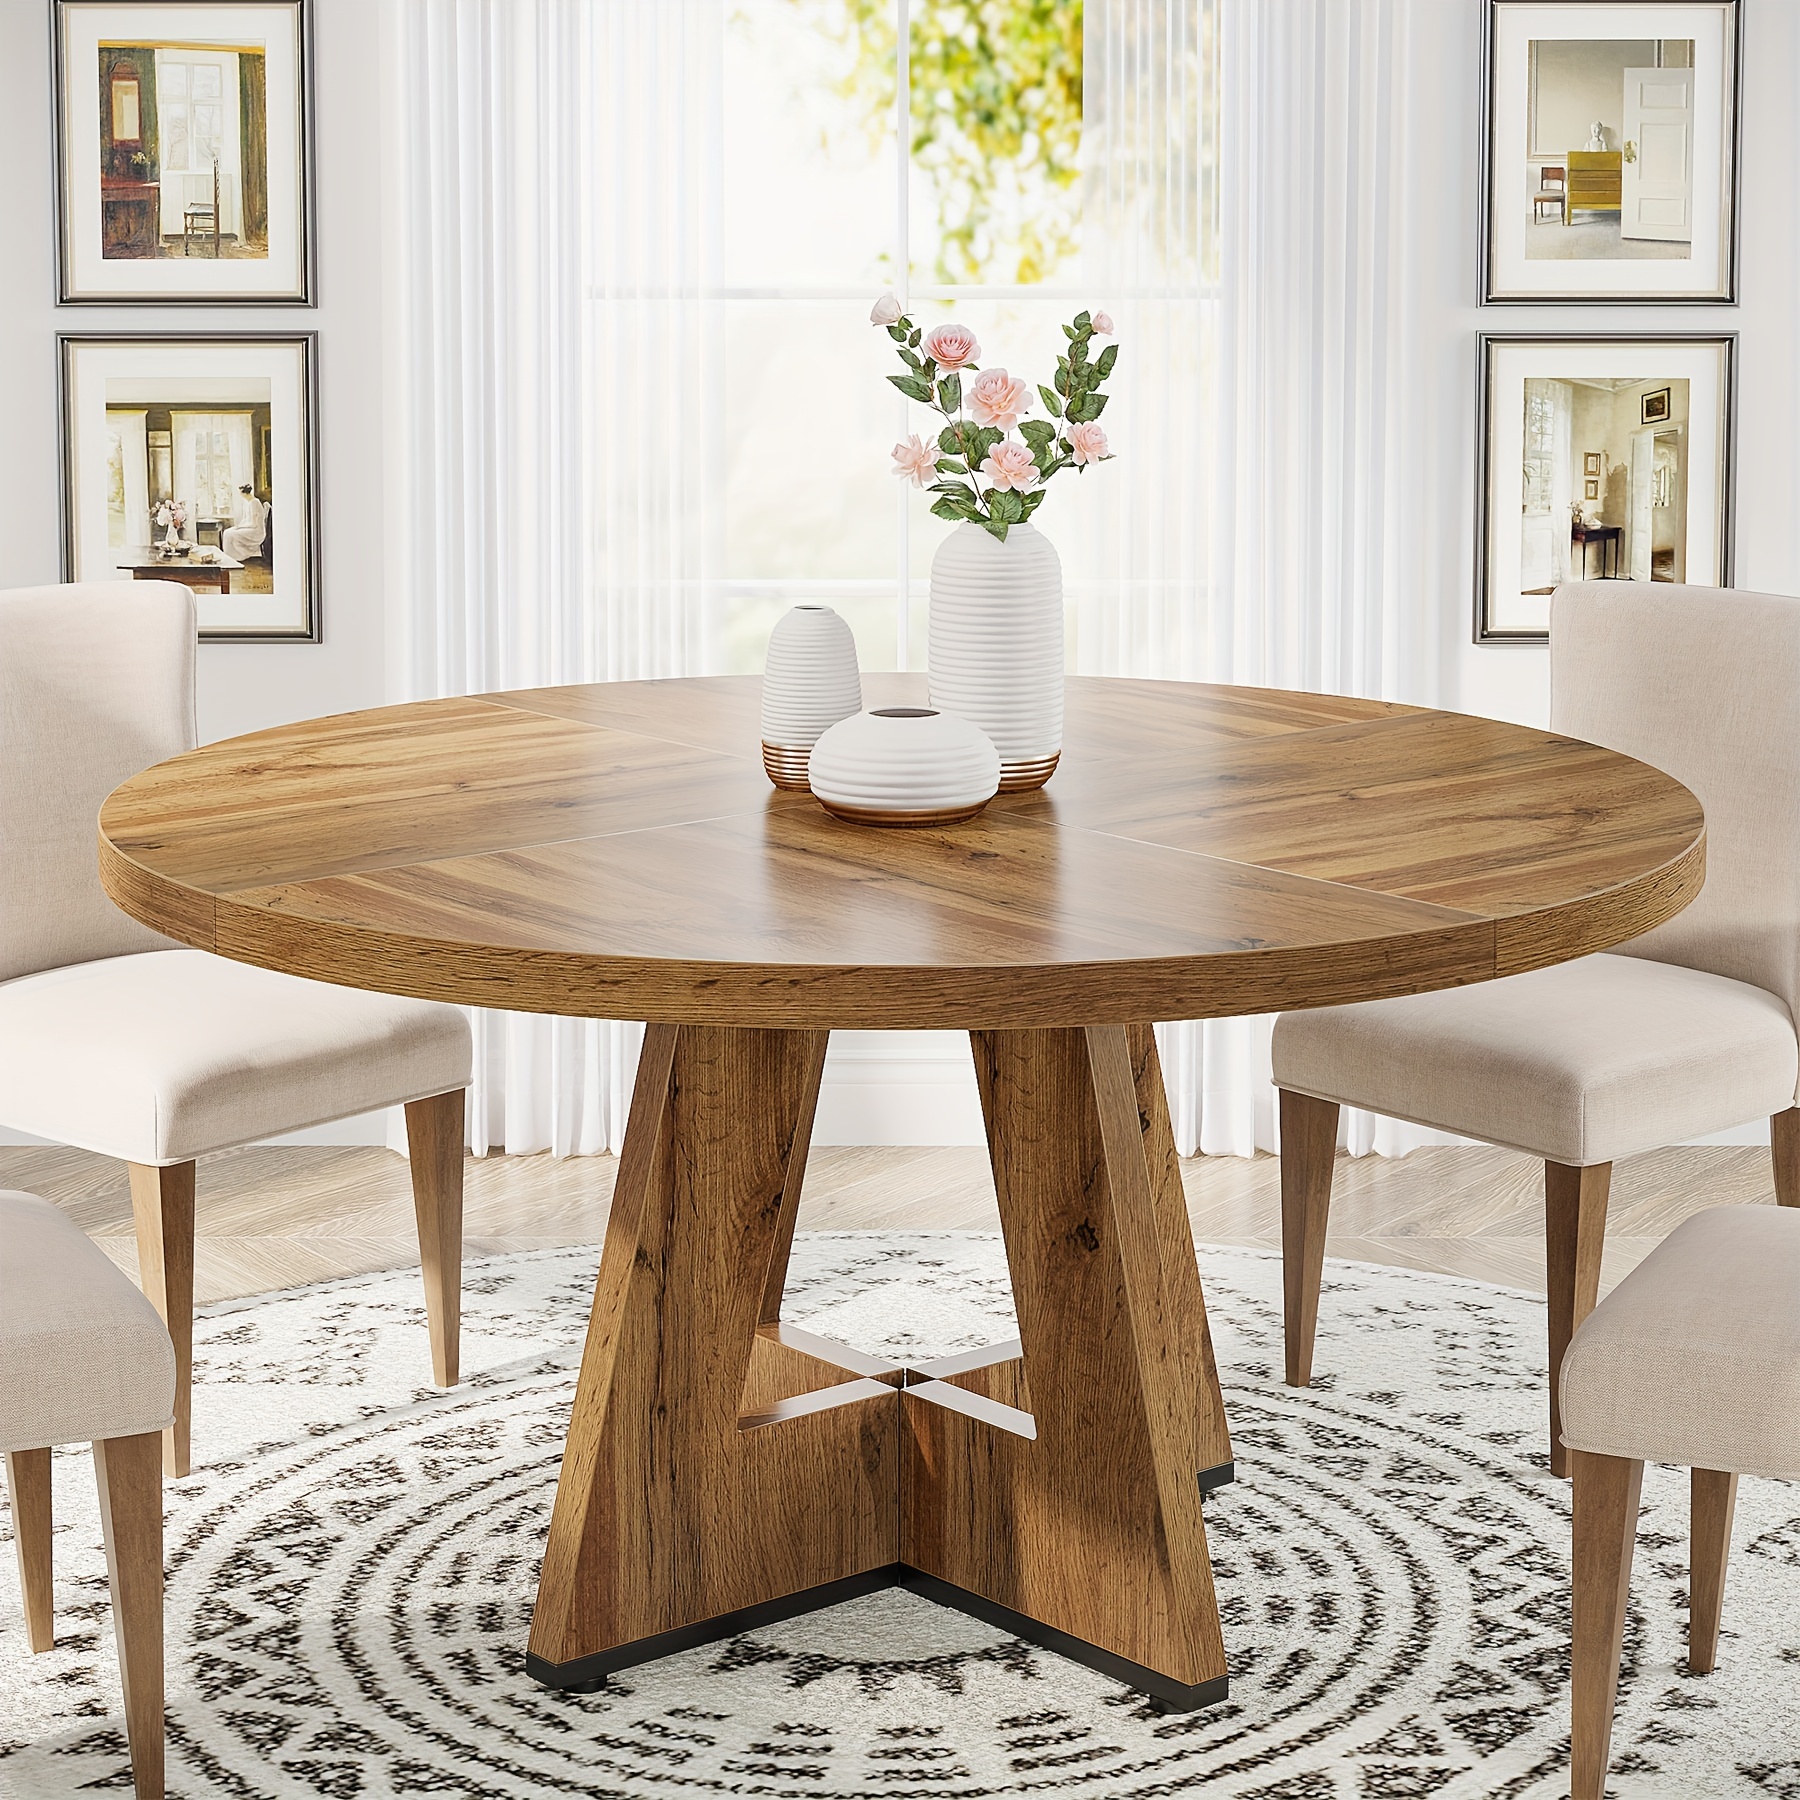 

Little Tree Round Dining Table For 4, 47 Inch Retro Brown Kitchen Table Small Dinner Table Farmhouse Wood Kitchen Dinning Table For Dining Room Kitchen, Living Room (chairs Not Included)